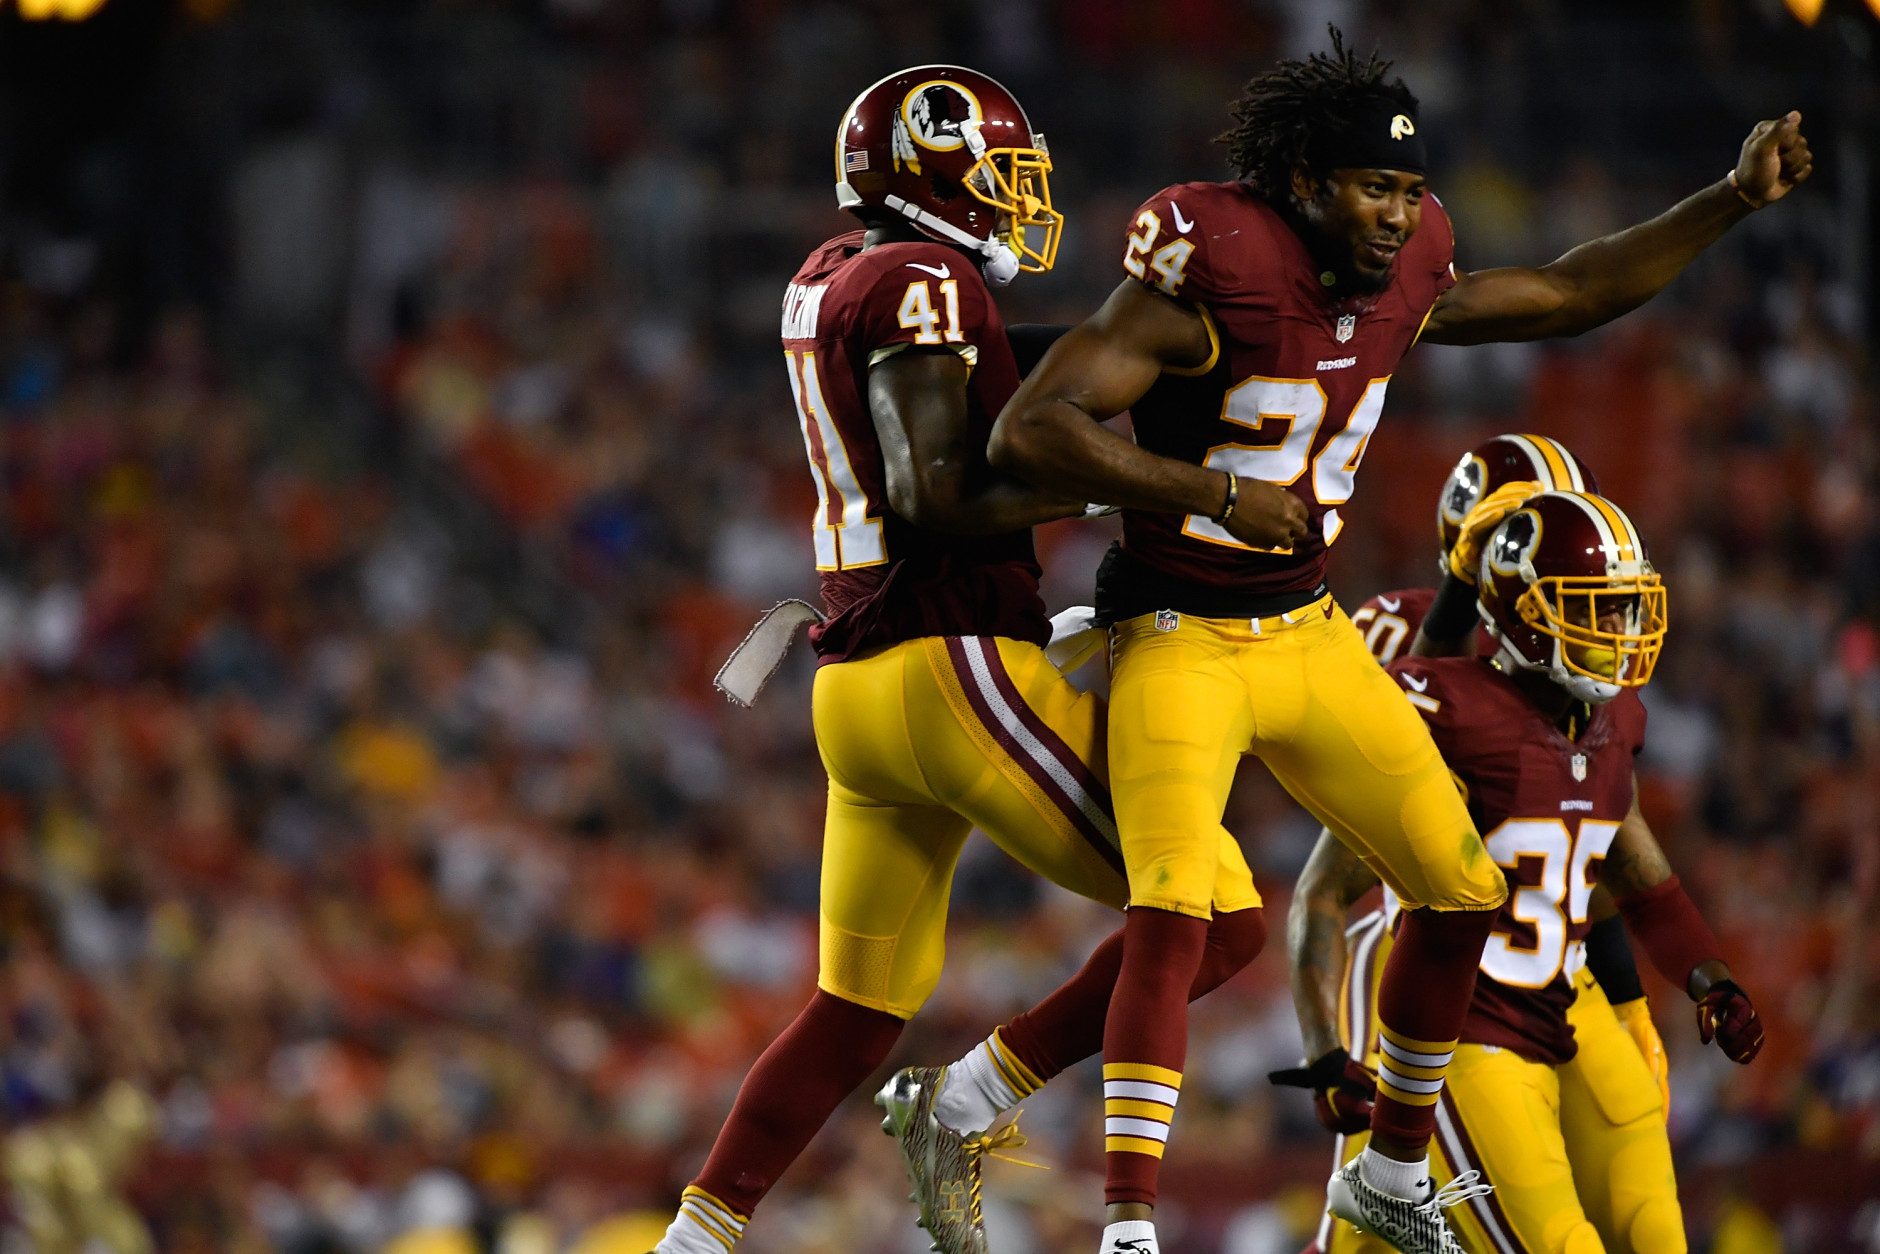 LANDOVER, MD - AUGUST 26:  Cornerback Will Blackmon #41 of the Washington Redskins and defensive back Josh Norman #24 of the Washington Redskins celebrate a third quarter fumble recovery during the game between the Washington Redskins and the Buffalo Bills at FedExField on August 26, 2016 in Landover, Maryland. The Redskins defeated the Bills 21-16.  (Photo by Larry French/Getty Images)